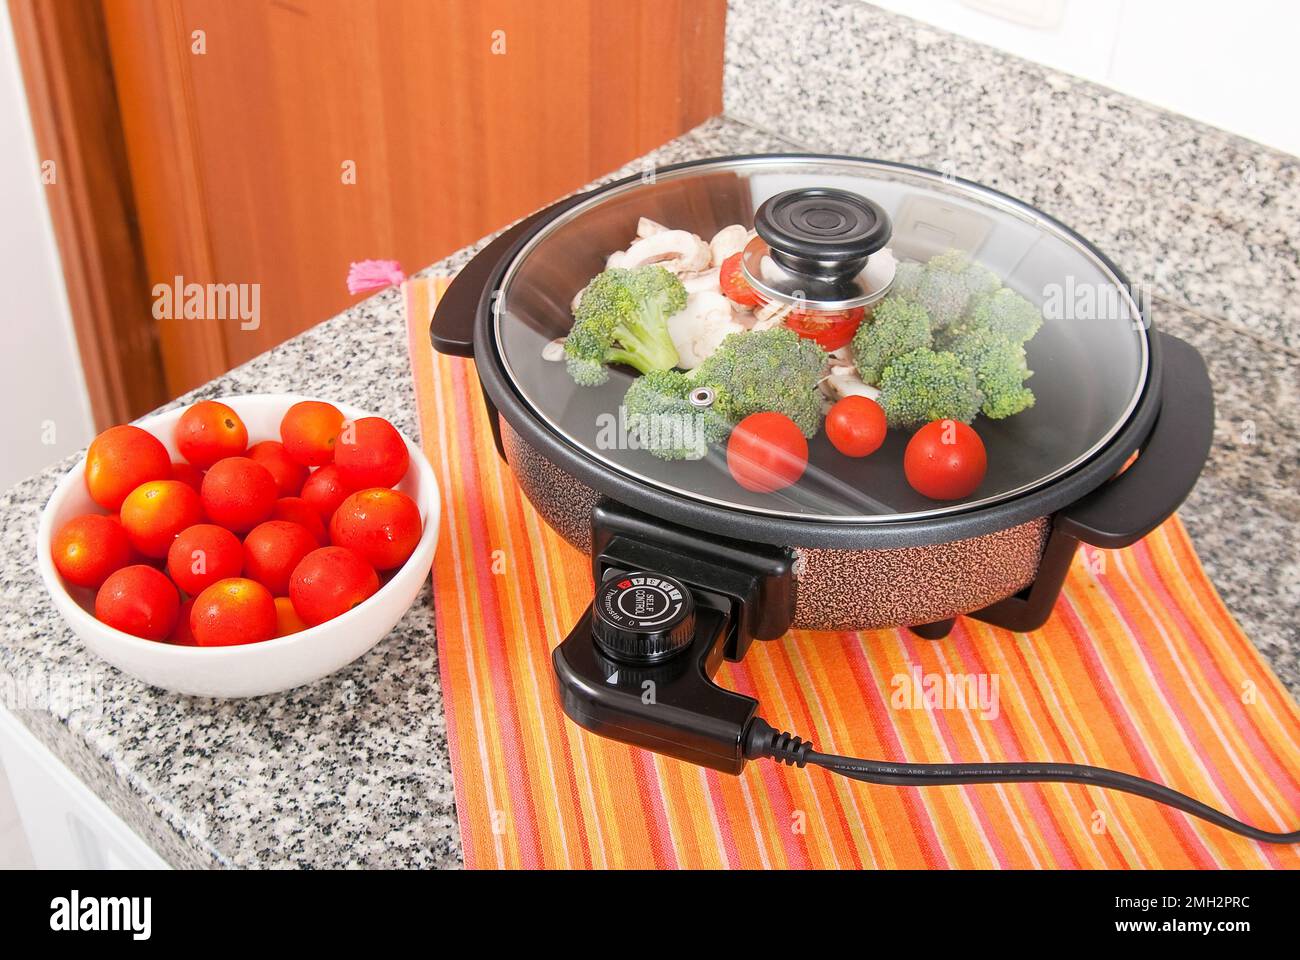 https://c8.alamy.com/comp/2MH2PRC/household-appliance-i-practice-electric-frying-pan-2MH2PRC.jpg